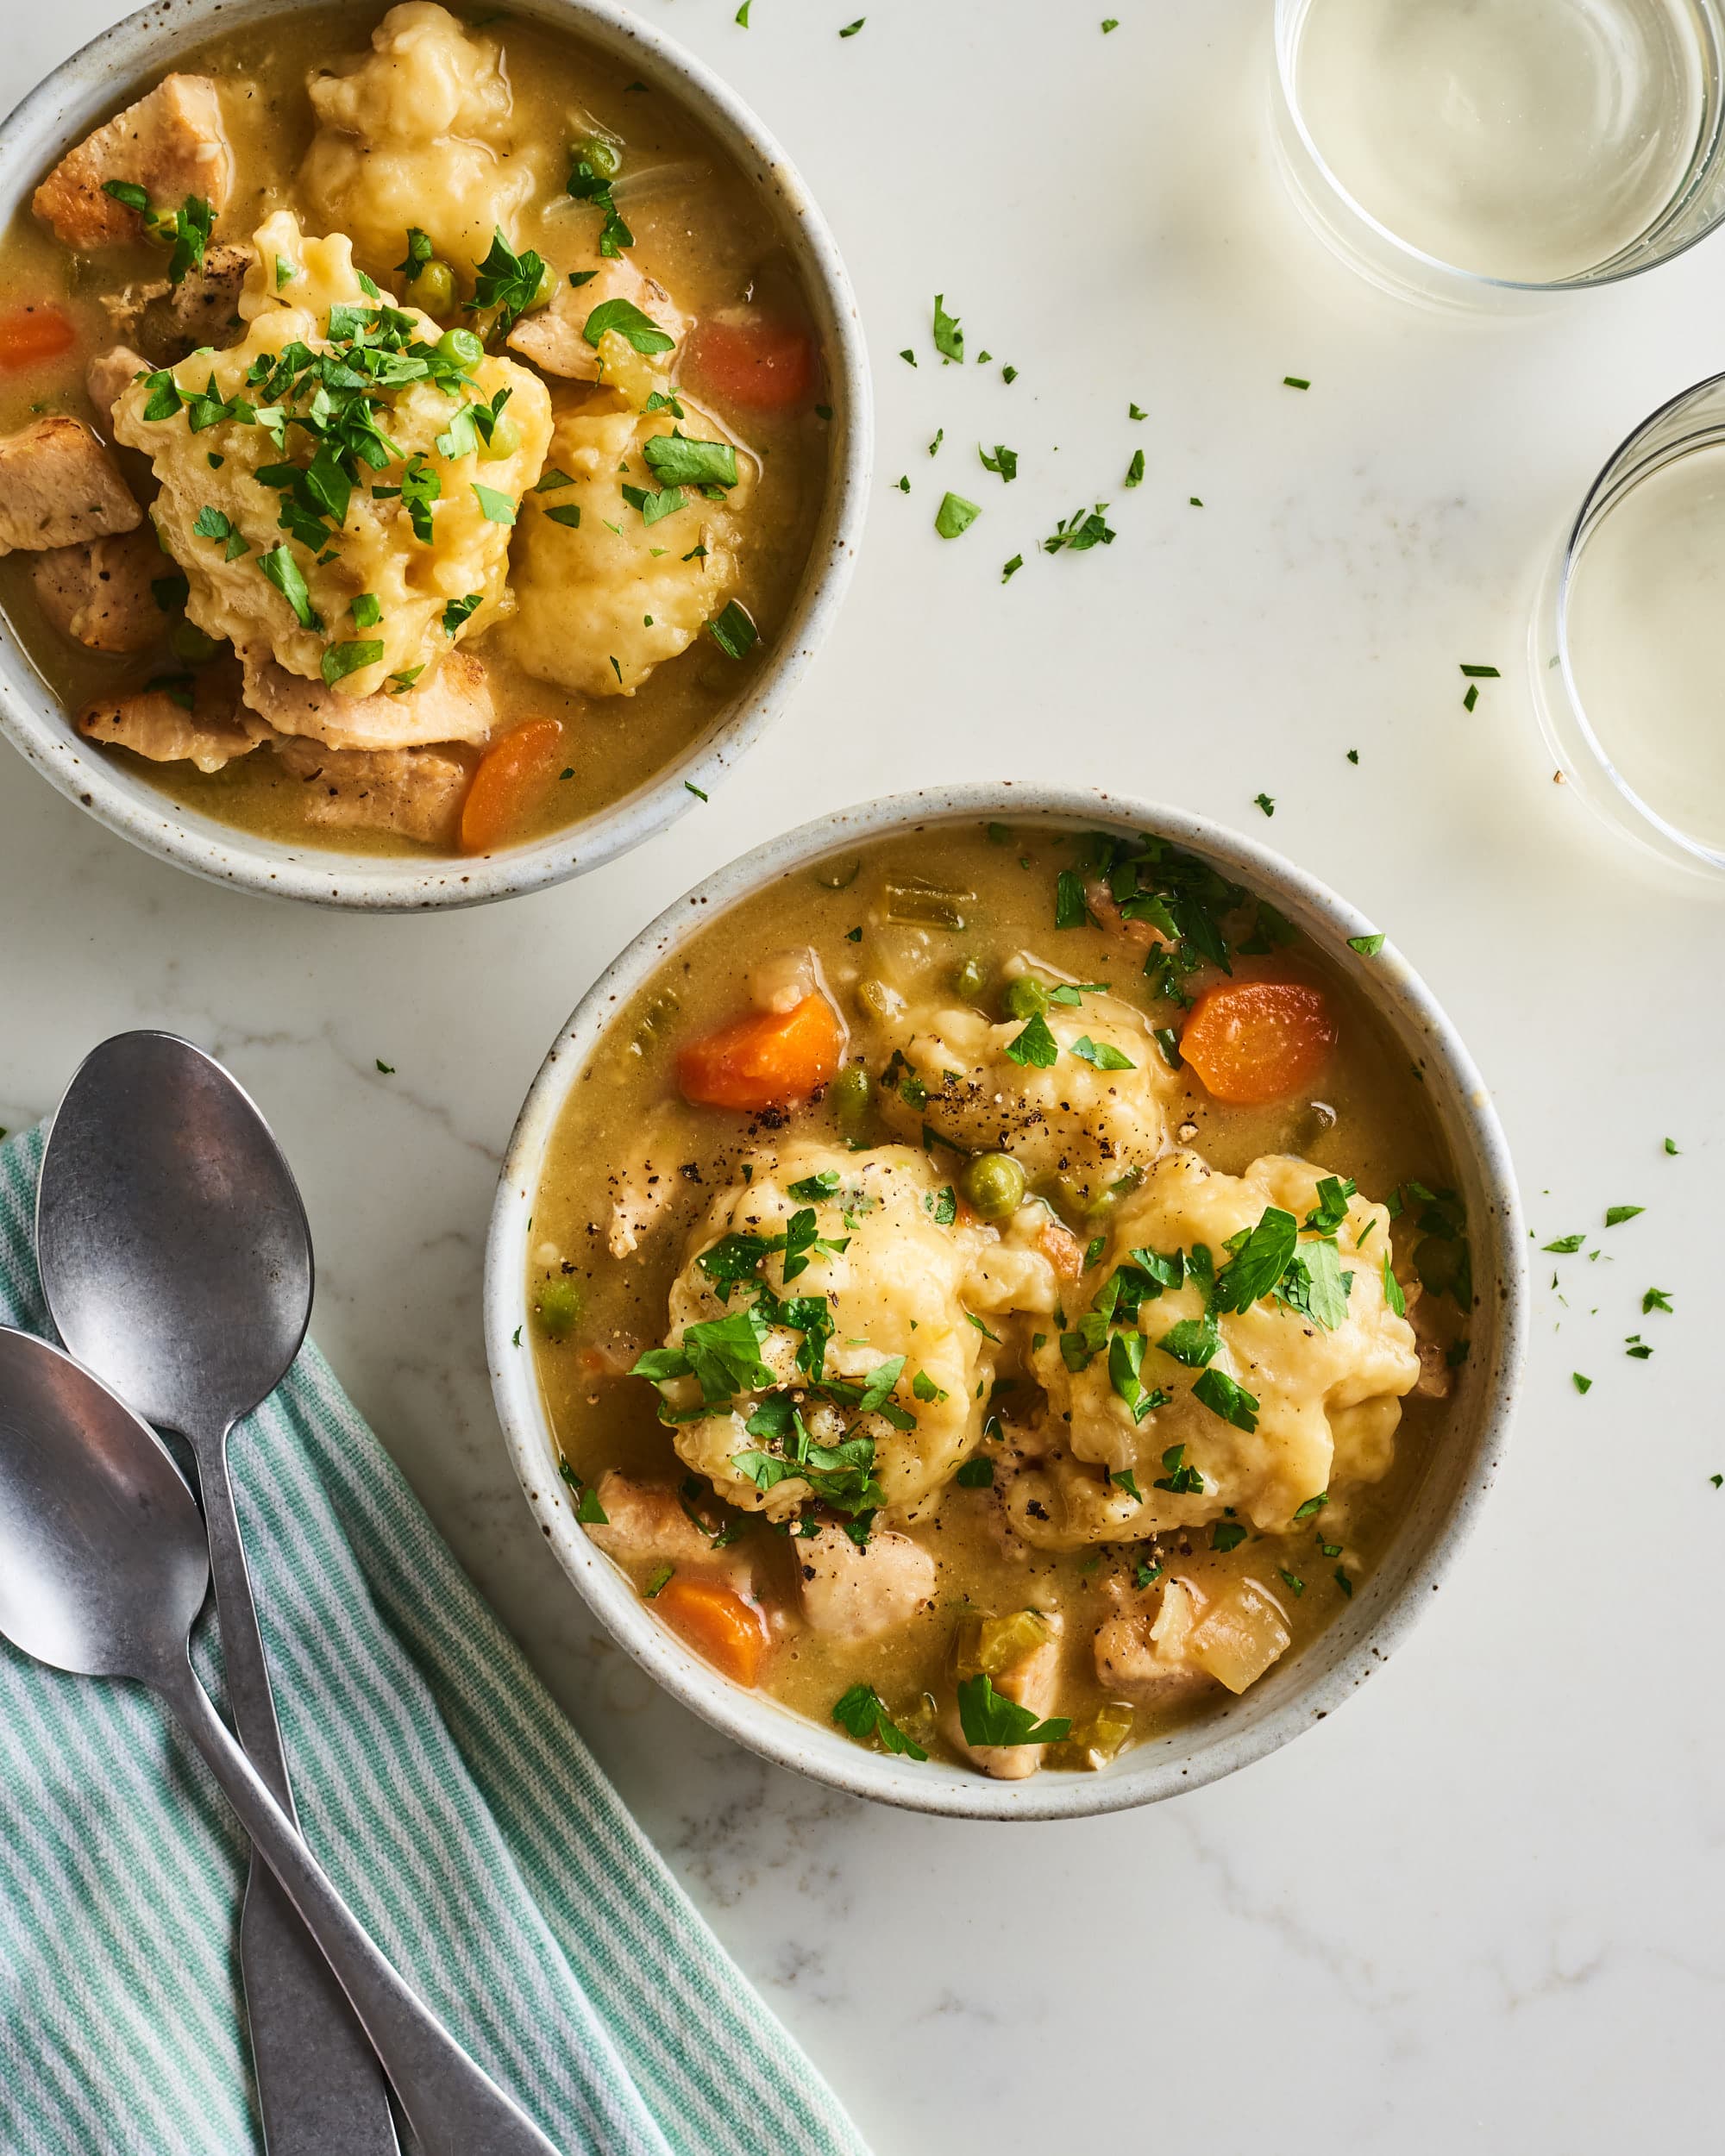 https://cdn.apartmenttherapy.info/image/upload/v1580409861/k/Photo/Recipes/2020-02-How-To-Easy-Chicken-and-Dumplings/HT-Easy-Chicken-and-Dumplings_044.jpg